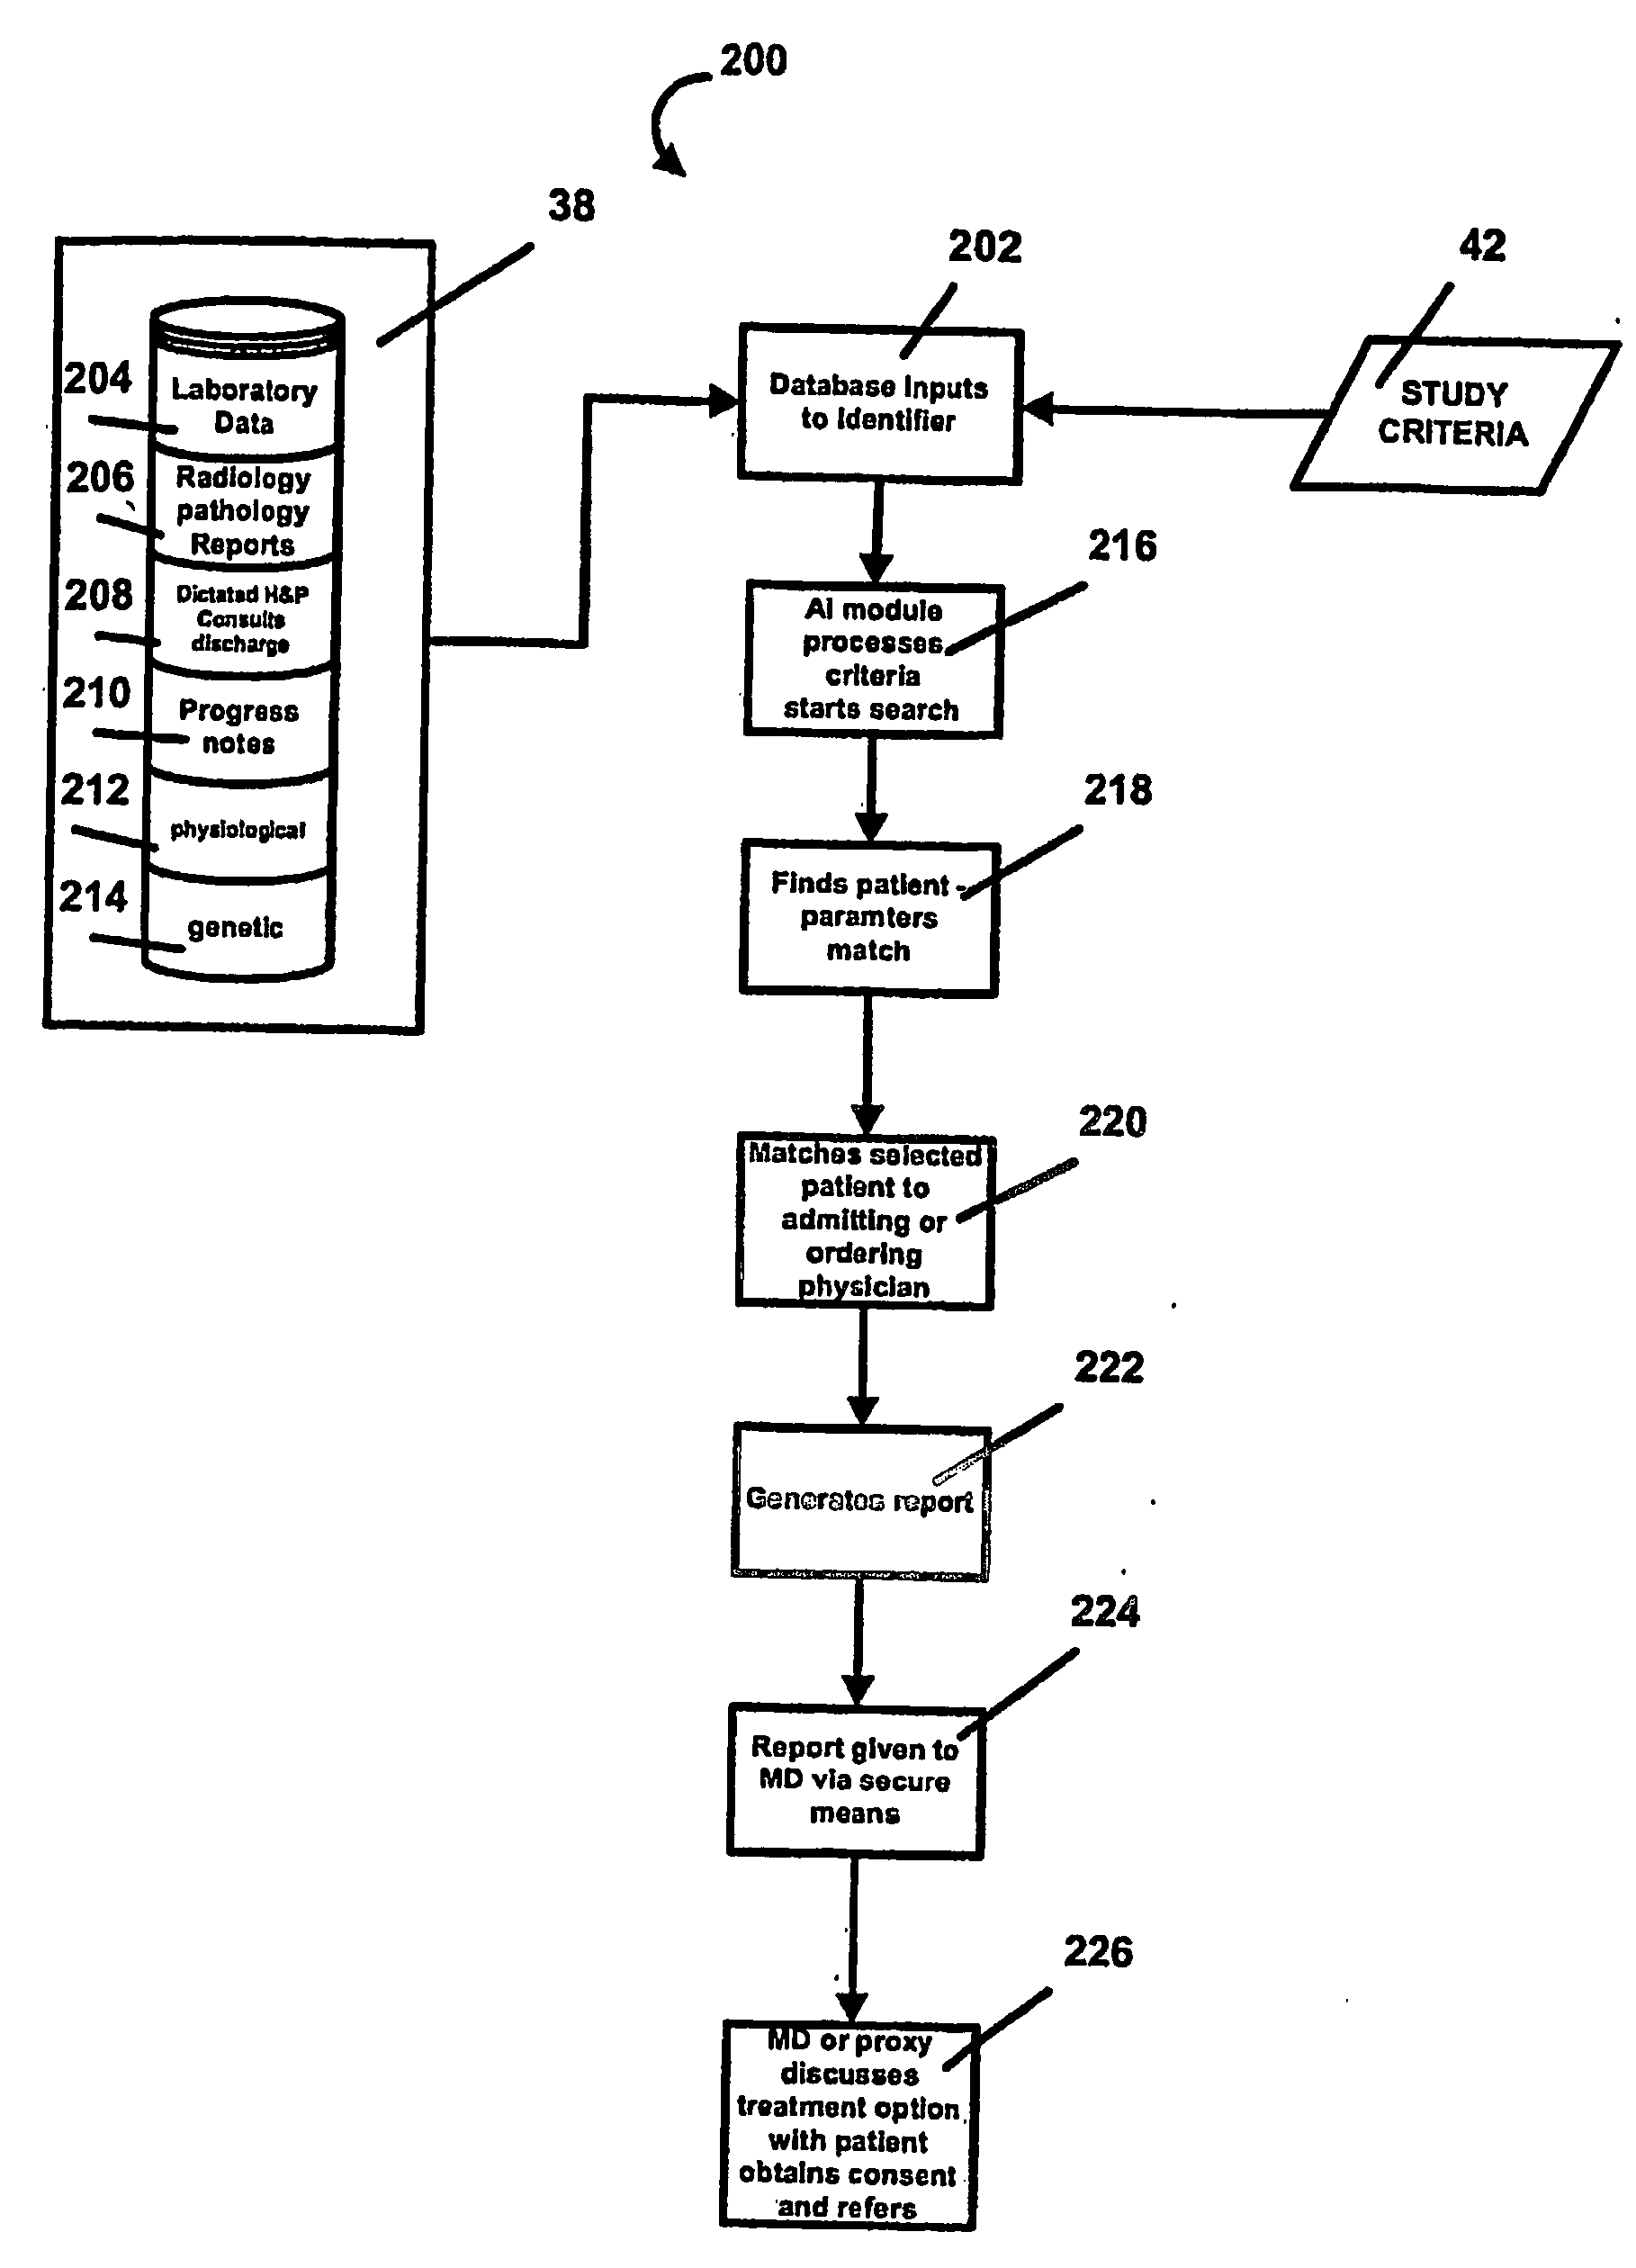 Method and process that automatically finds patients for clinical drug or device trials